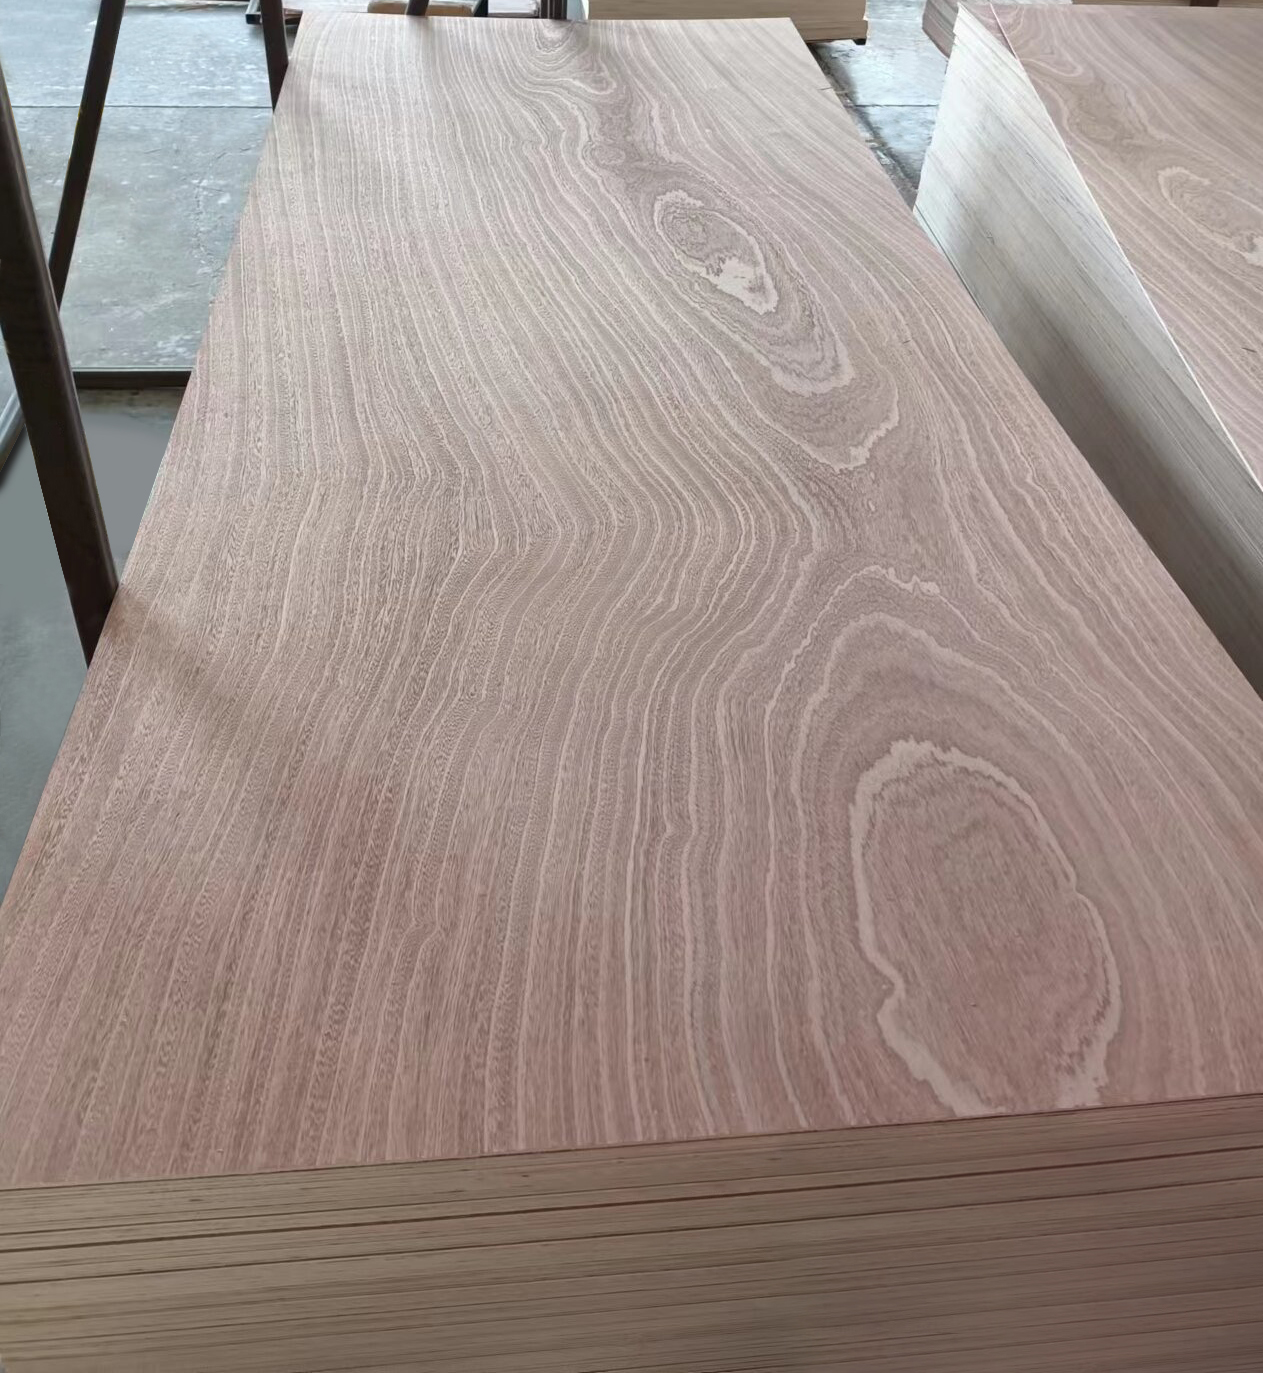 High Quality Sapele Plywood 3mm 4.5mm 5mm 12mm 15mm 18mm Manufacturer and  Supplier